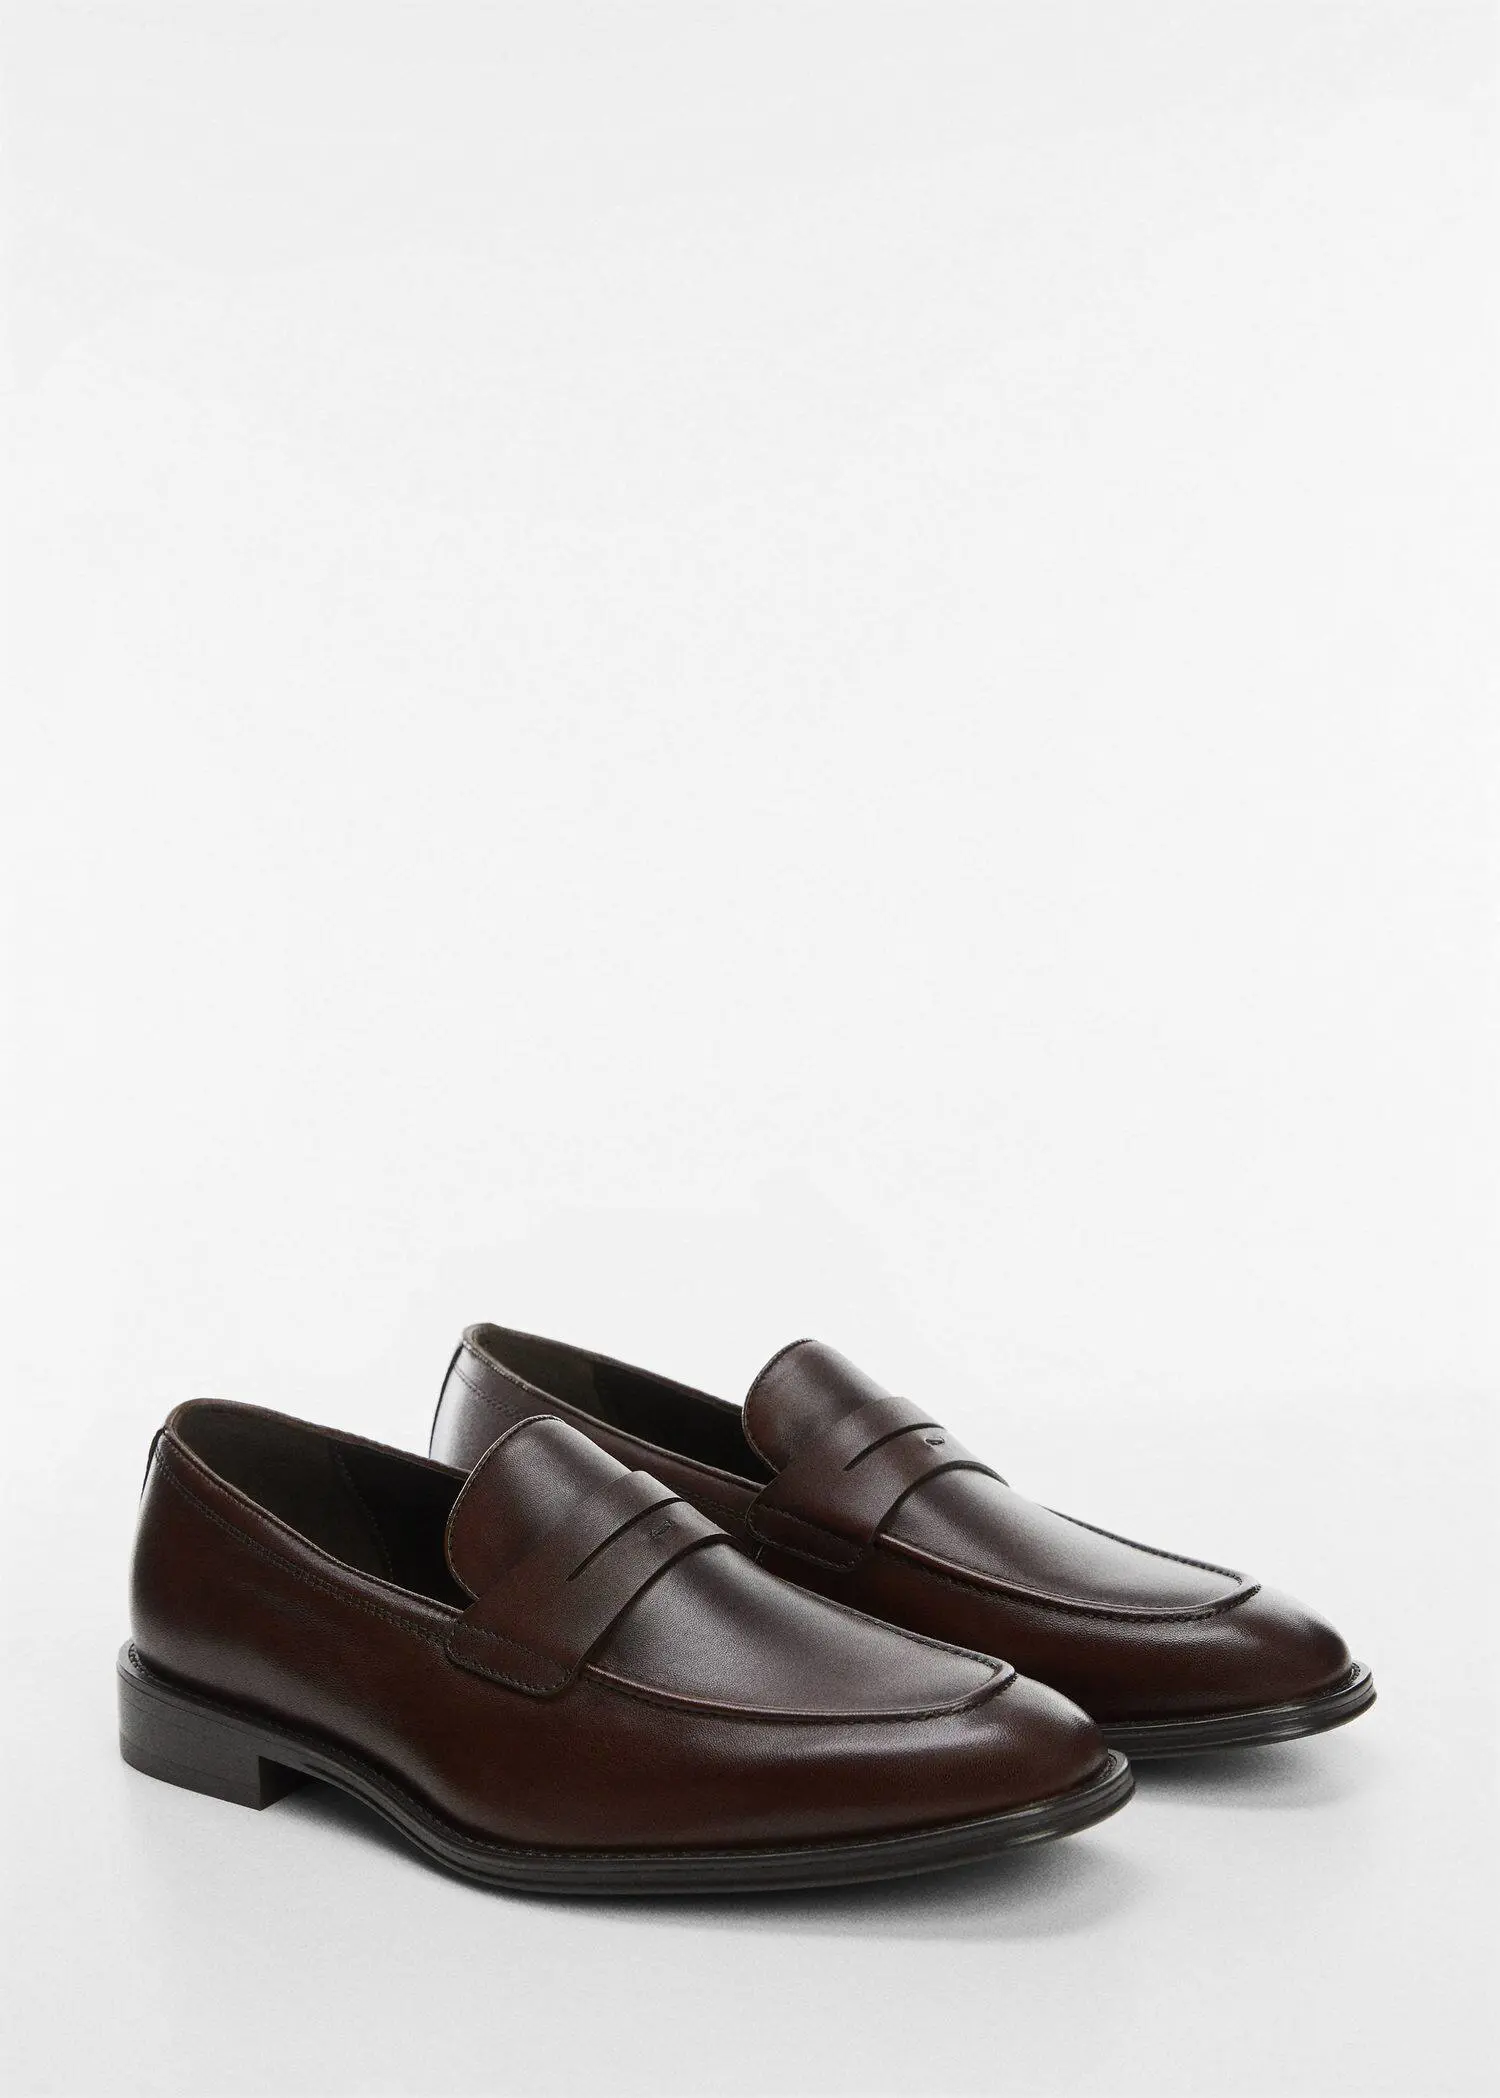 Mango Aged-leather loafers. a pair of brown loafers on a white background. 